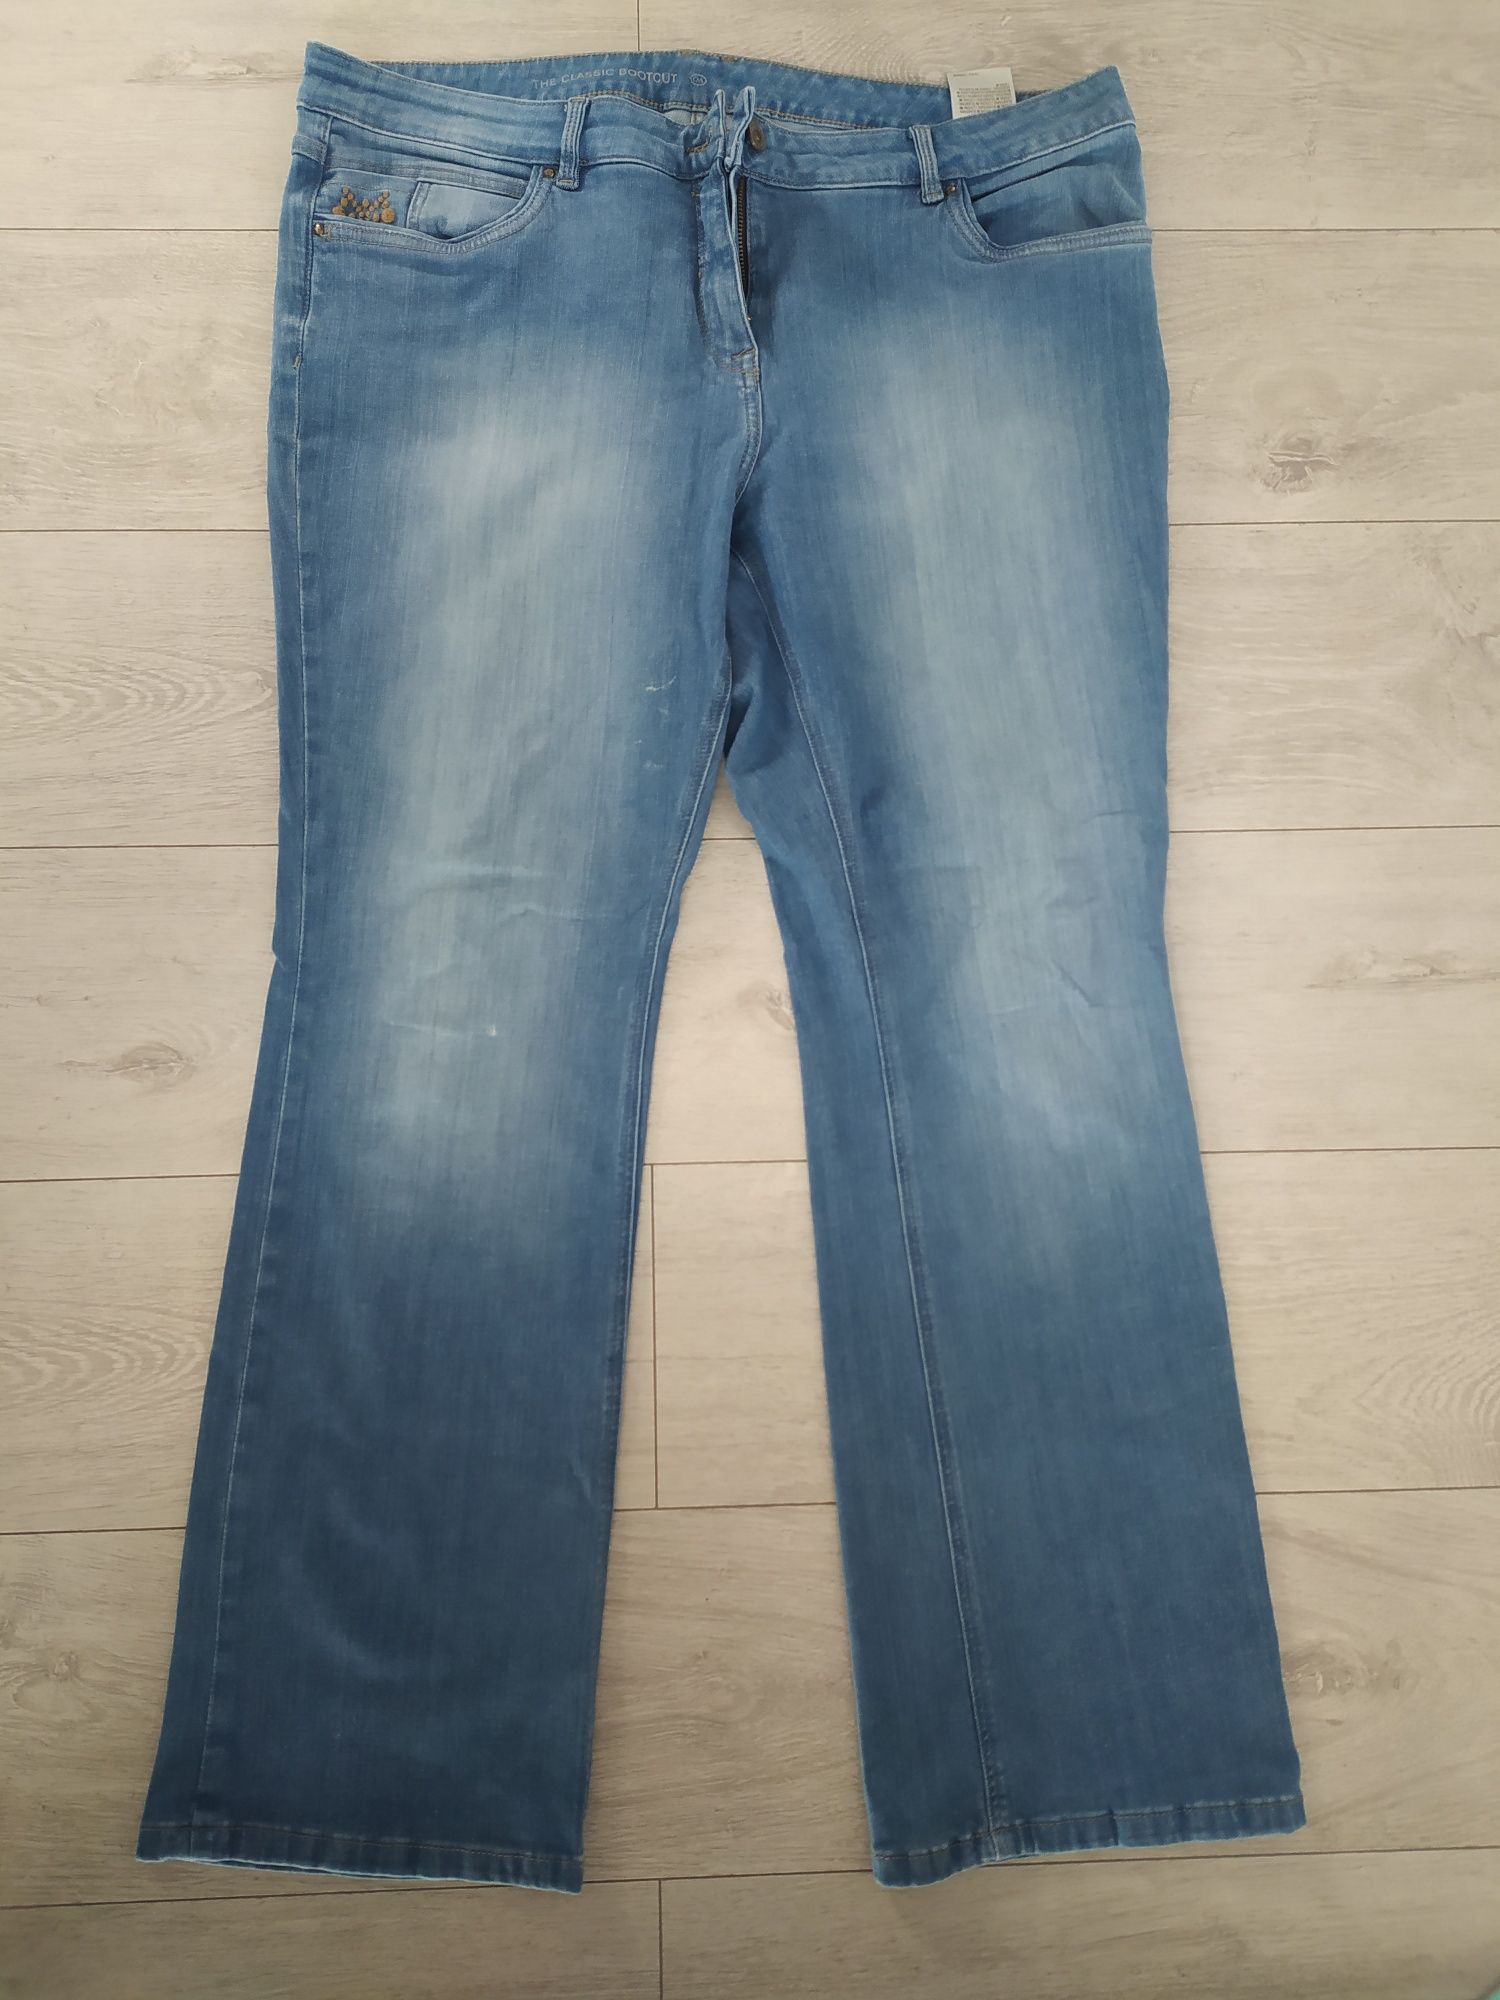 Jeansy classic bootcut C&A roz. 46